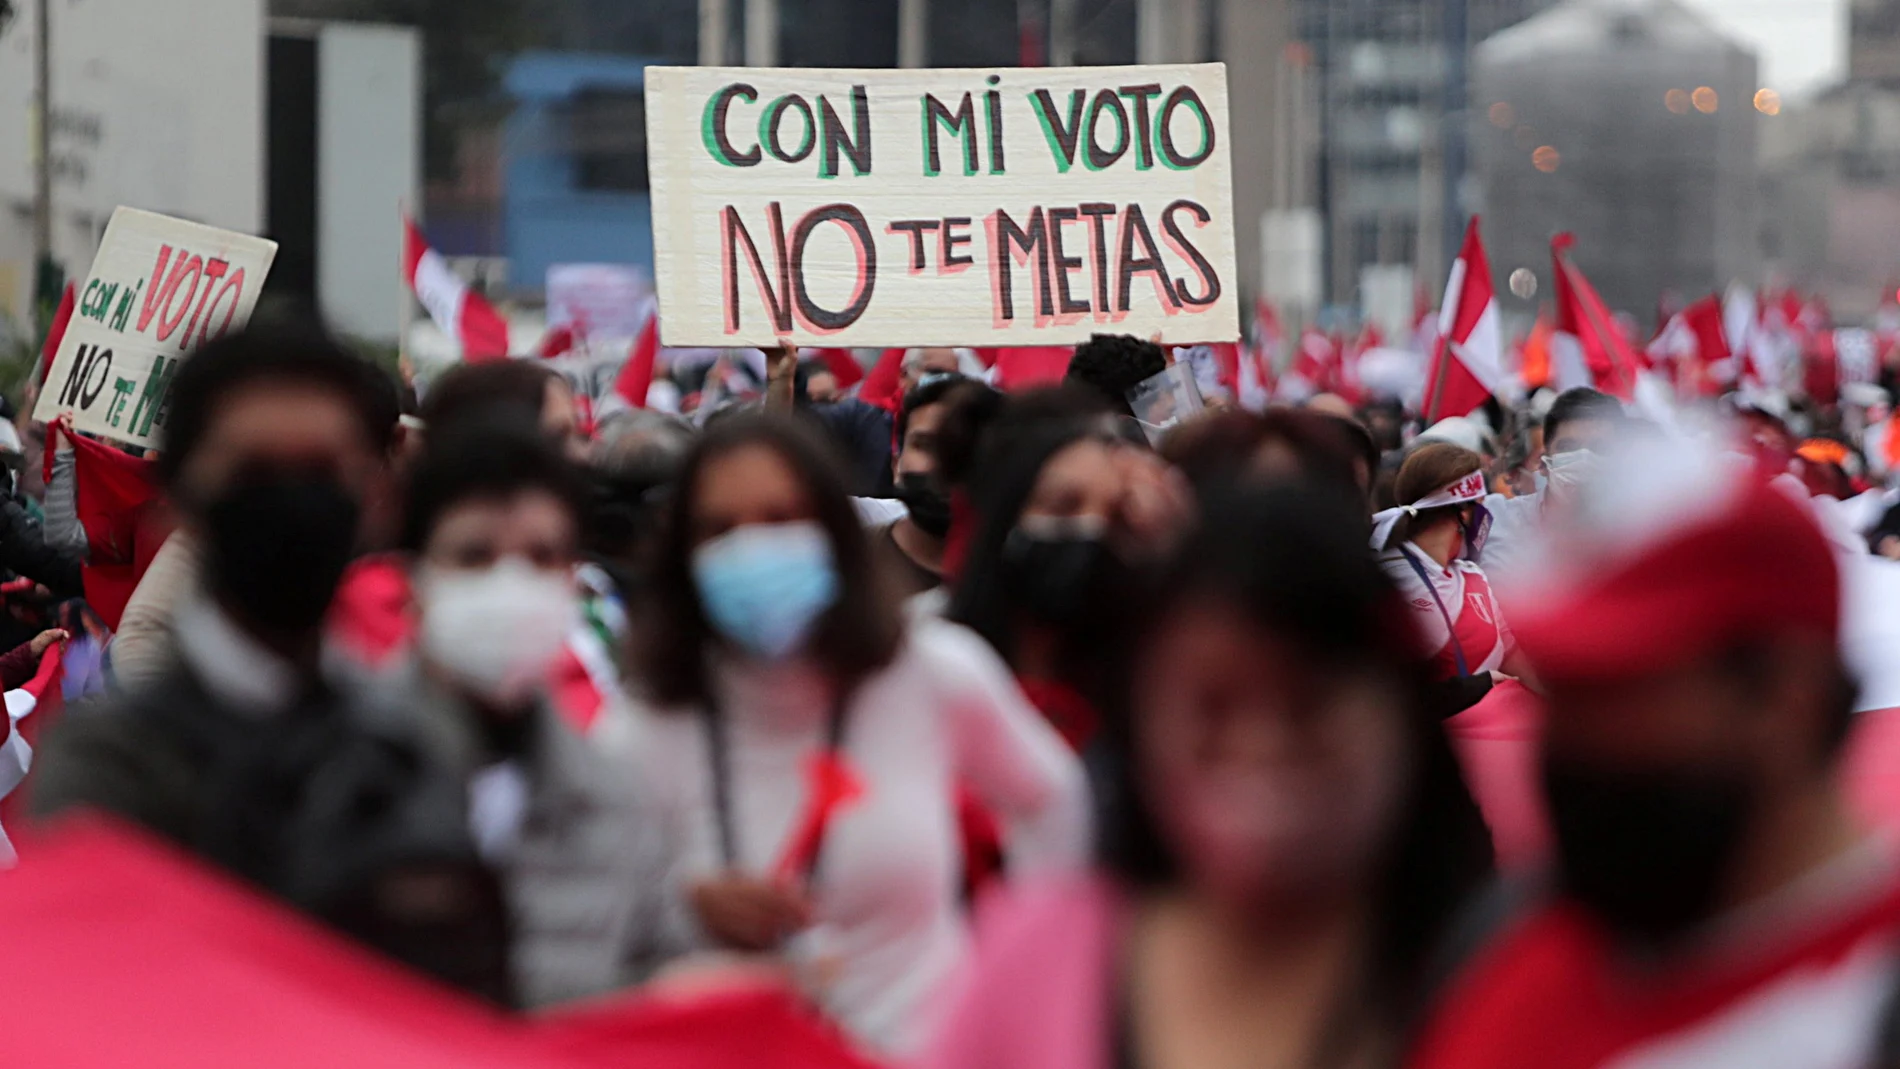 A sign that reads "Don't mess up with my vote" is displayed as supporters of Peru's presidential candidate Keiko Fujimori gather in Lima, Peru, June 9, 2021. REUTERS/Sebastian Castaneda